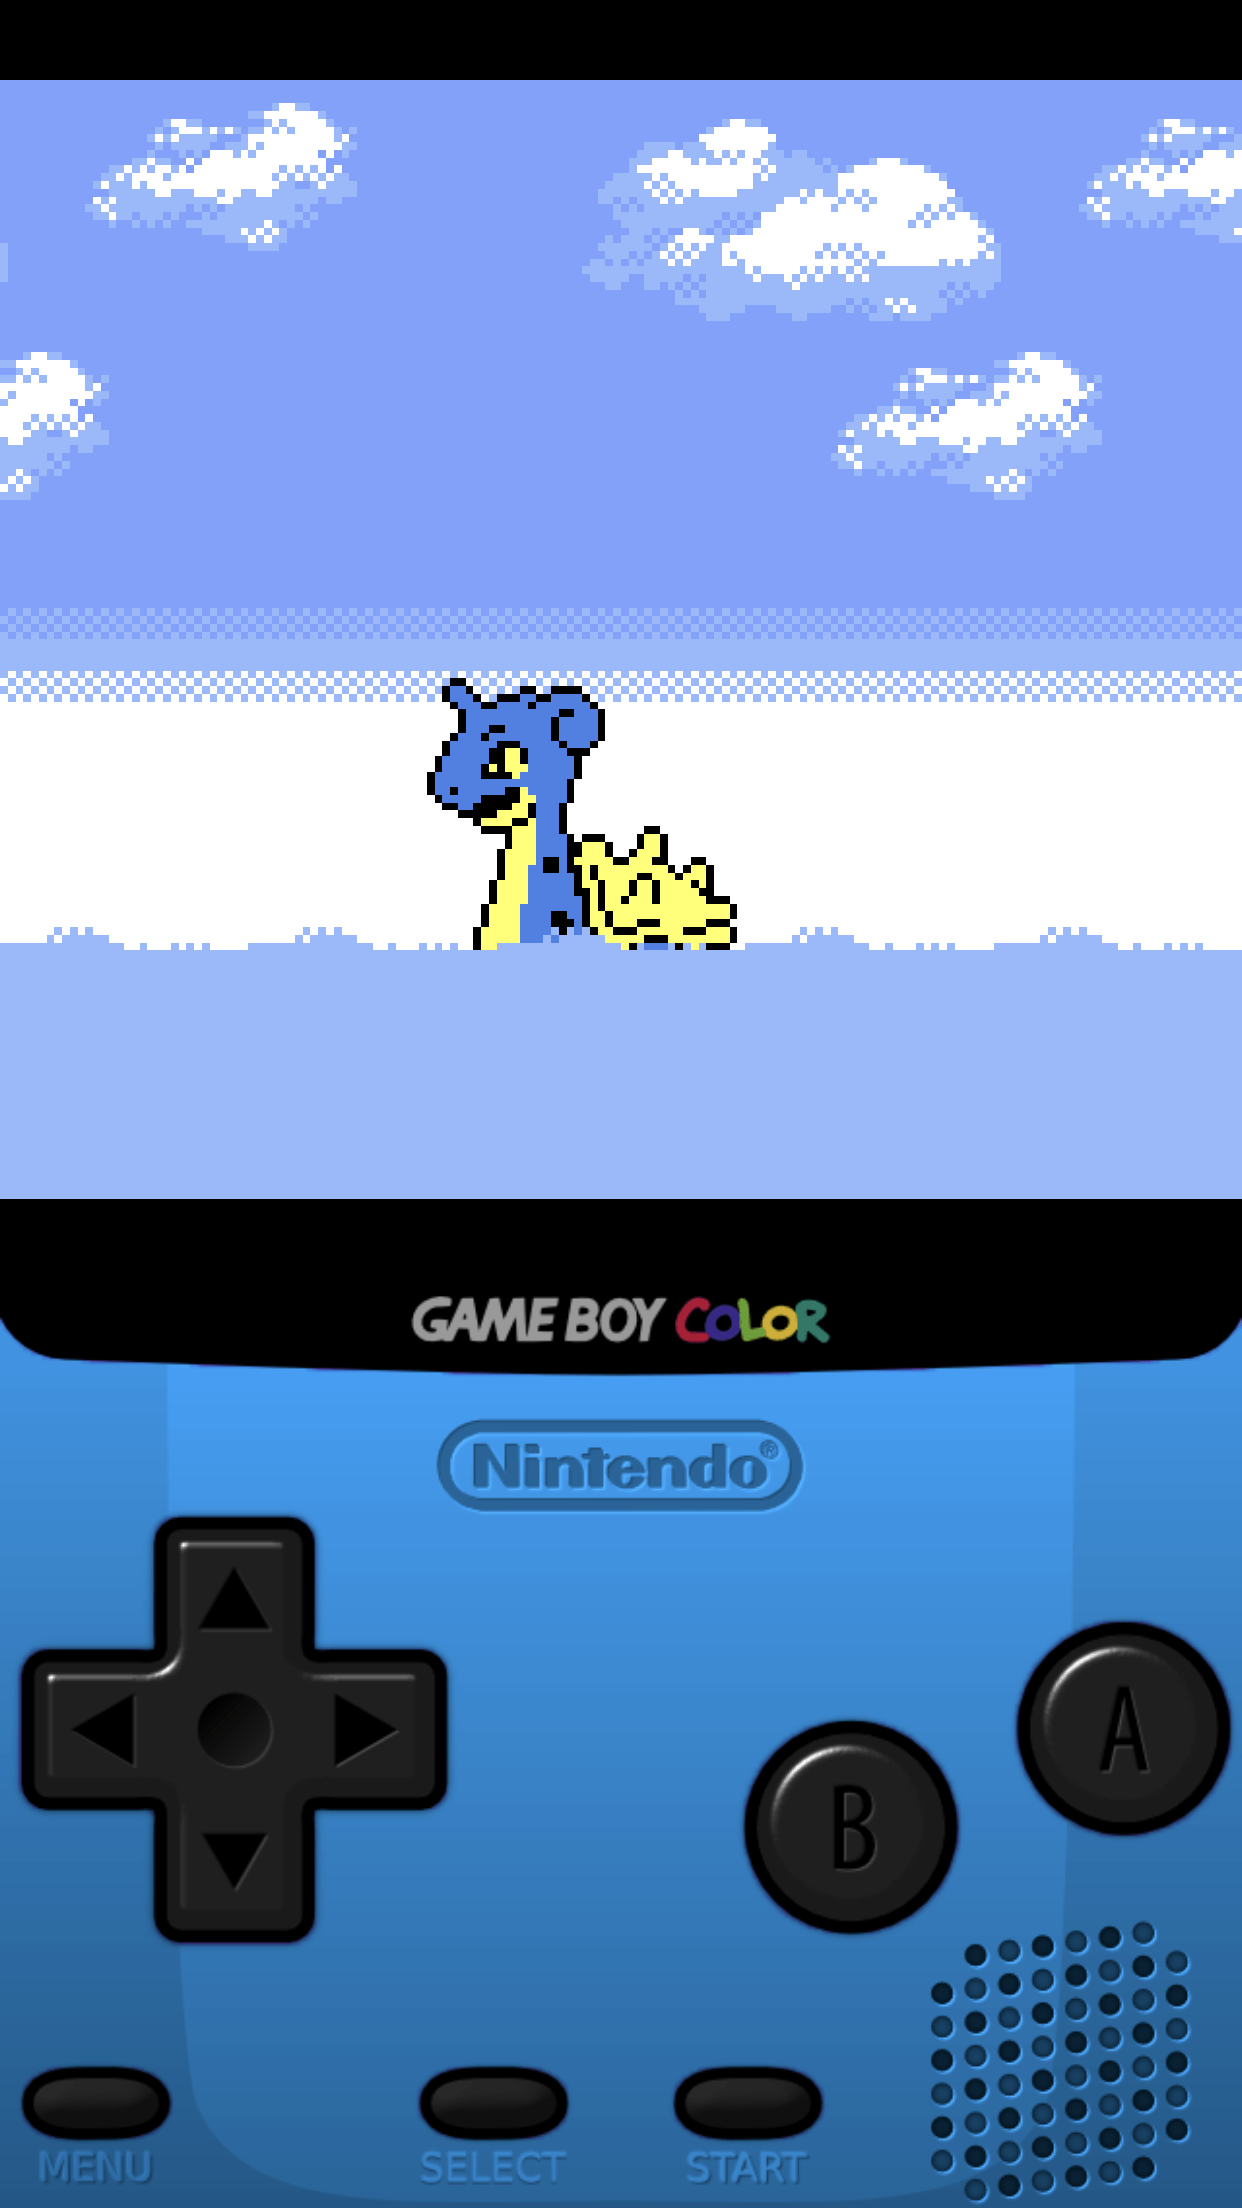 Gameboy wallpaper. cool background. Cool background